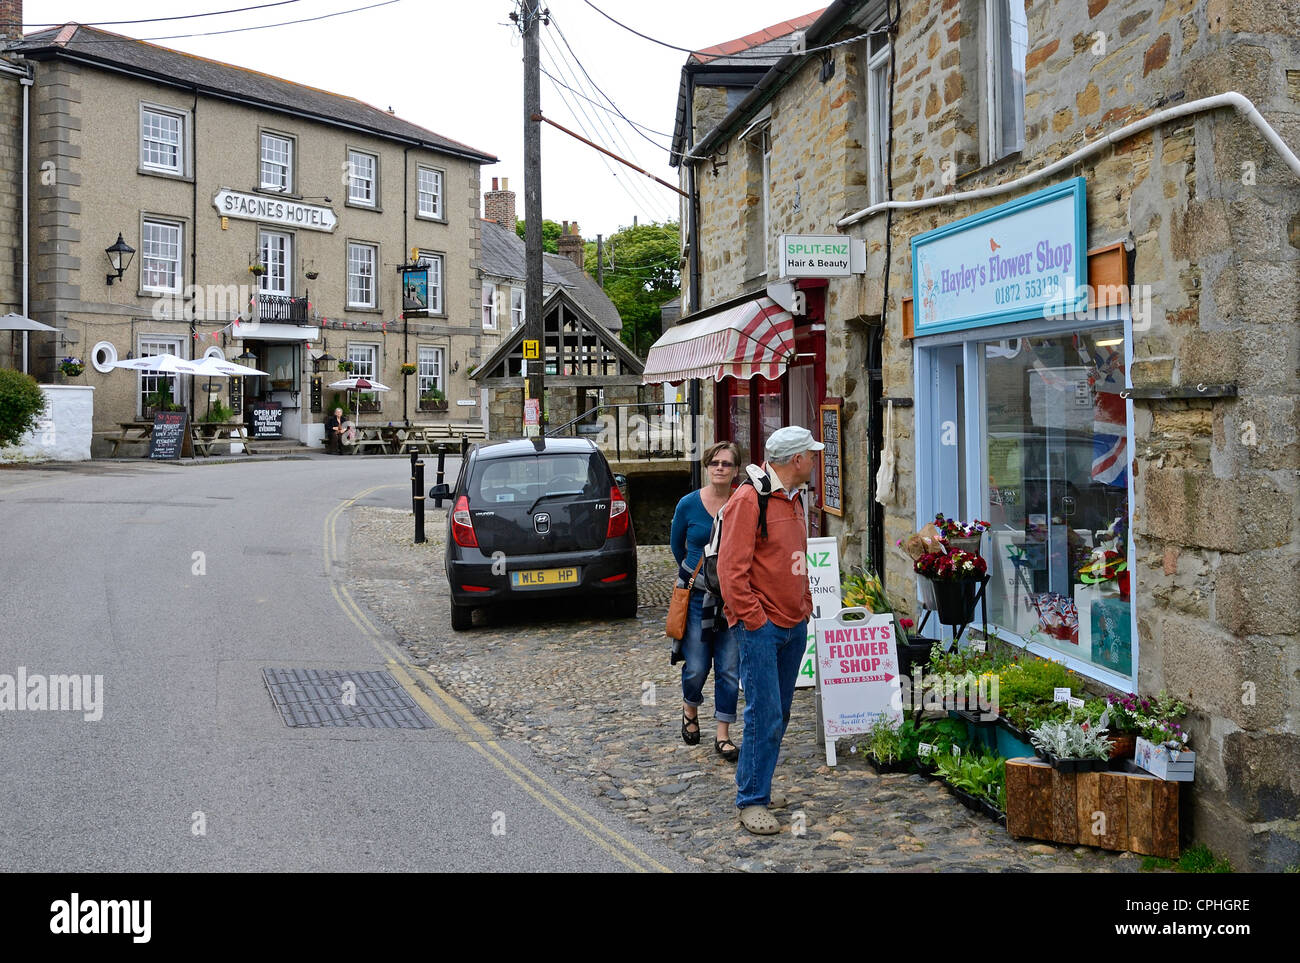 Tourists shopping in the cornish village of St..Agnes, Cornwall, England, UK Stock Photo